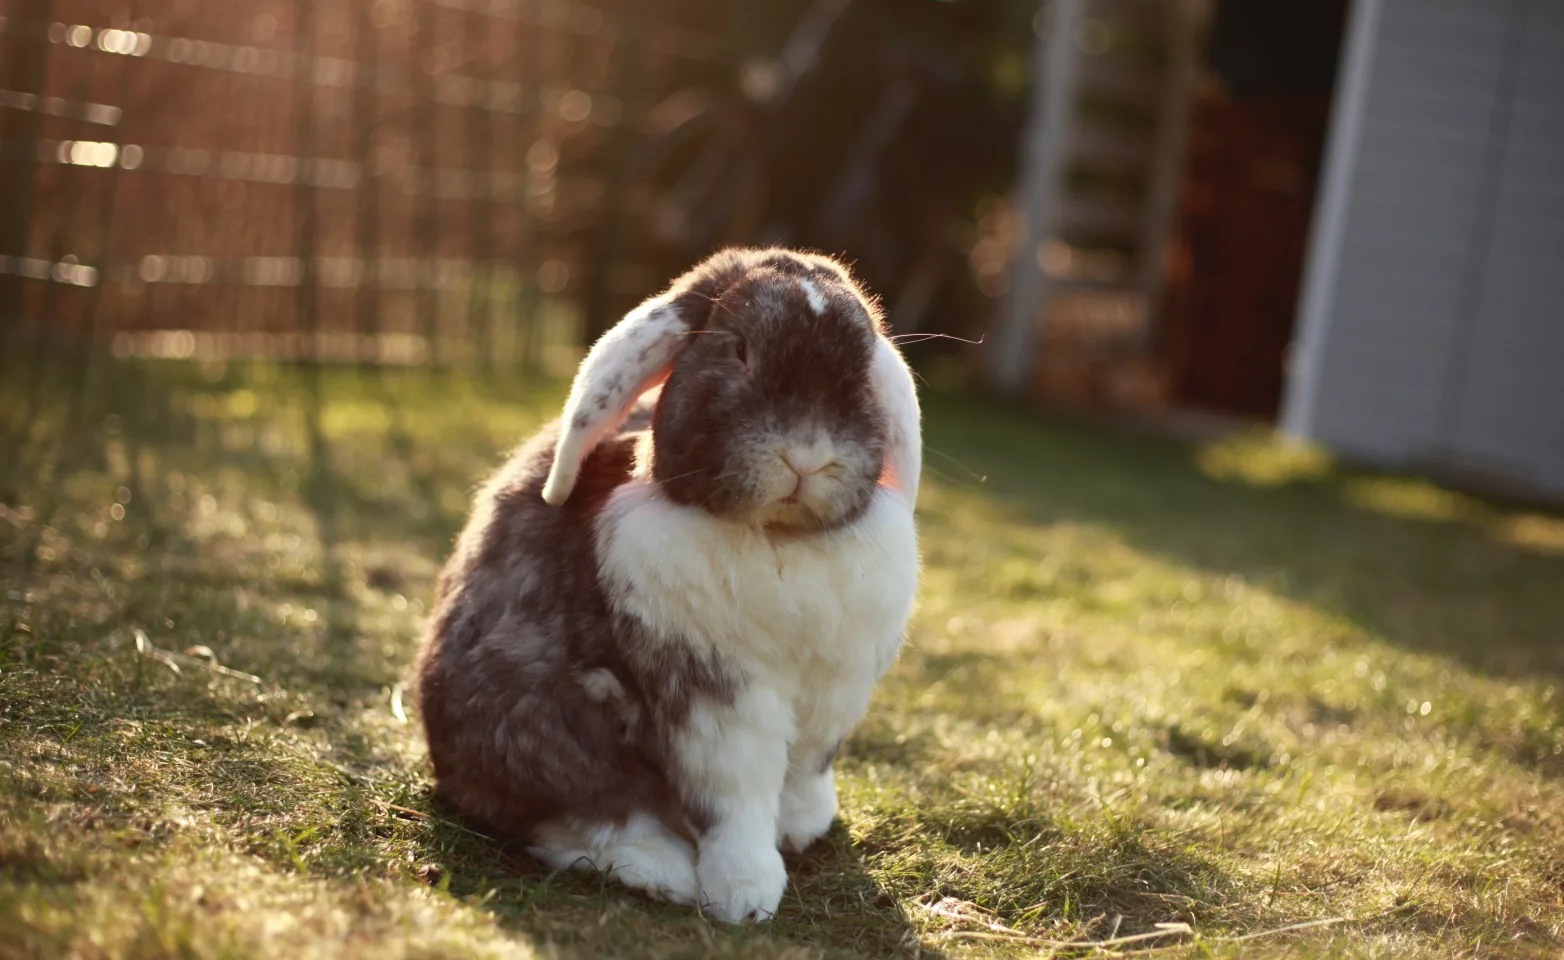 Rabbit sitting on the grass outside